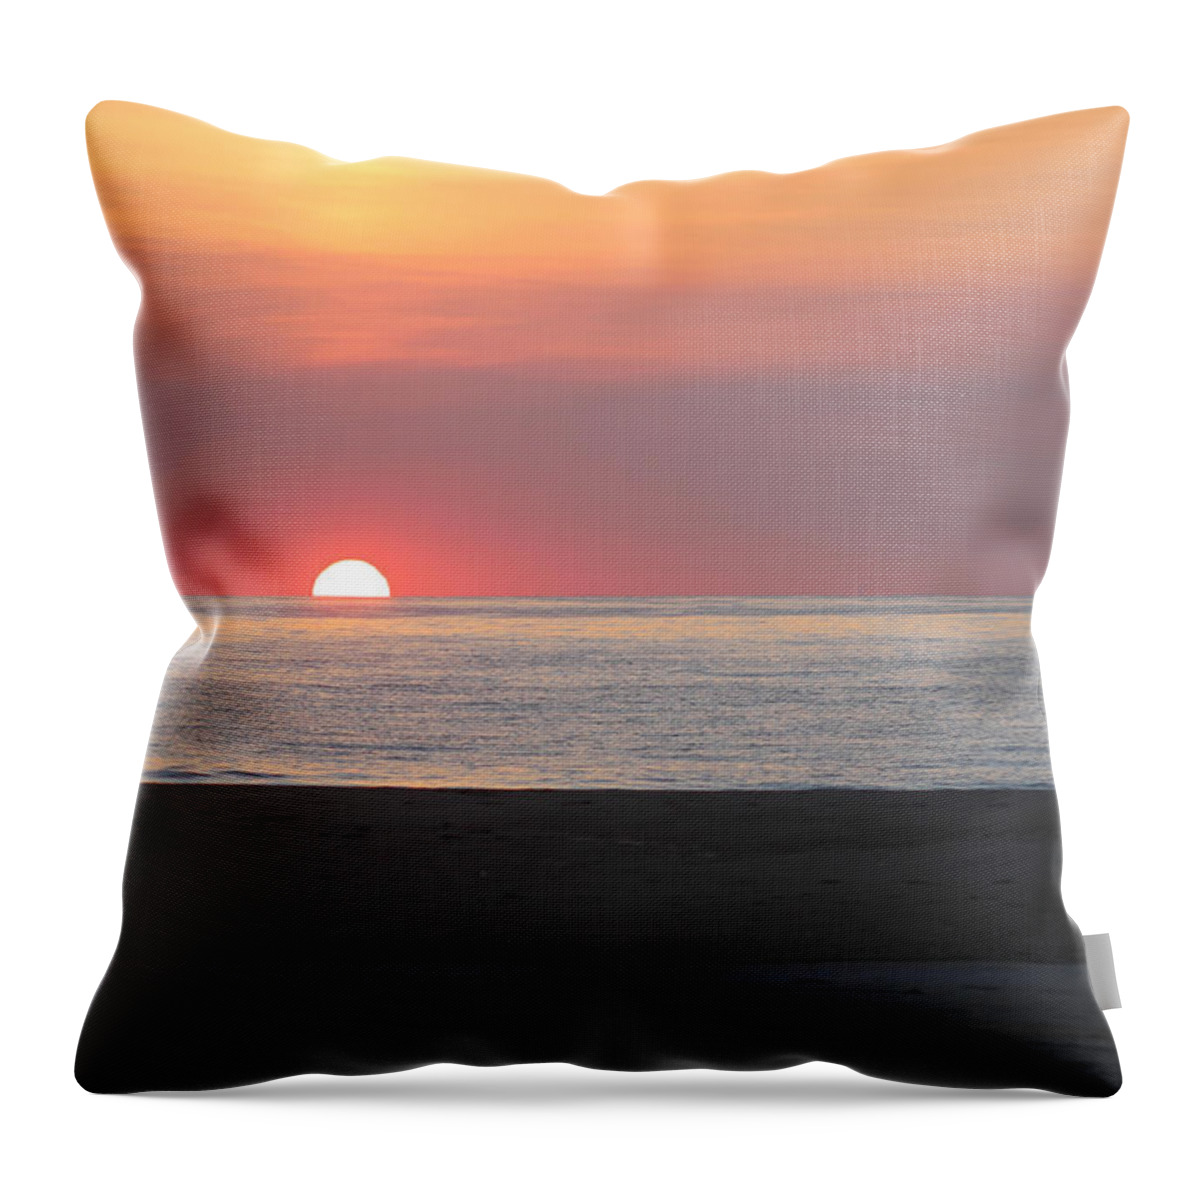 Seagull Throw Pillow featuring the photograph Seagull Watching Sunrise by Robert Banach